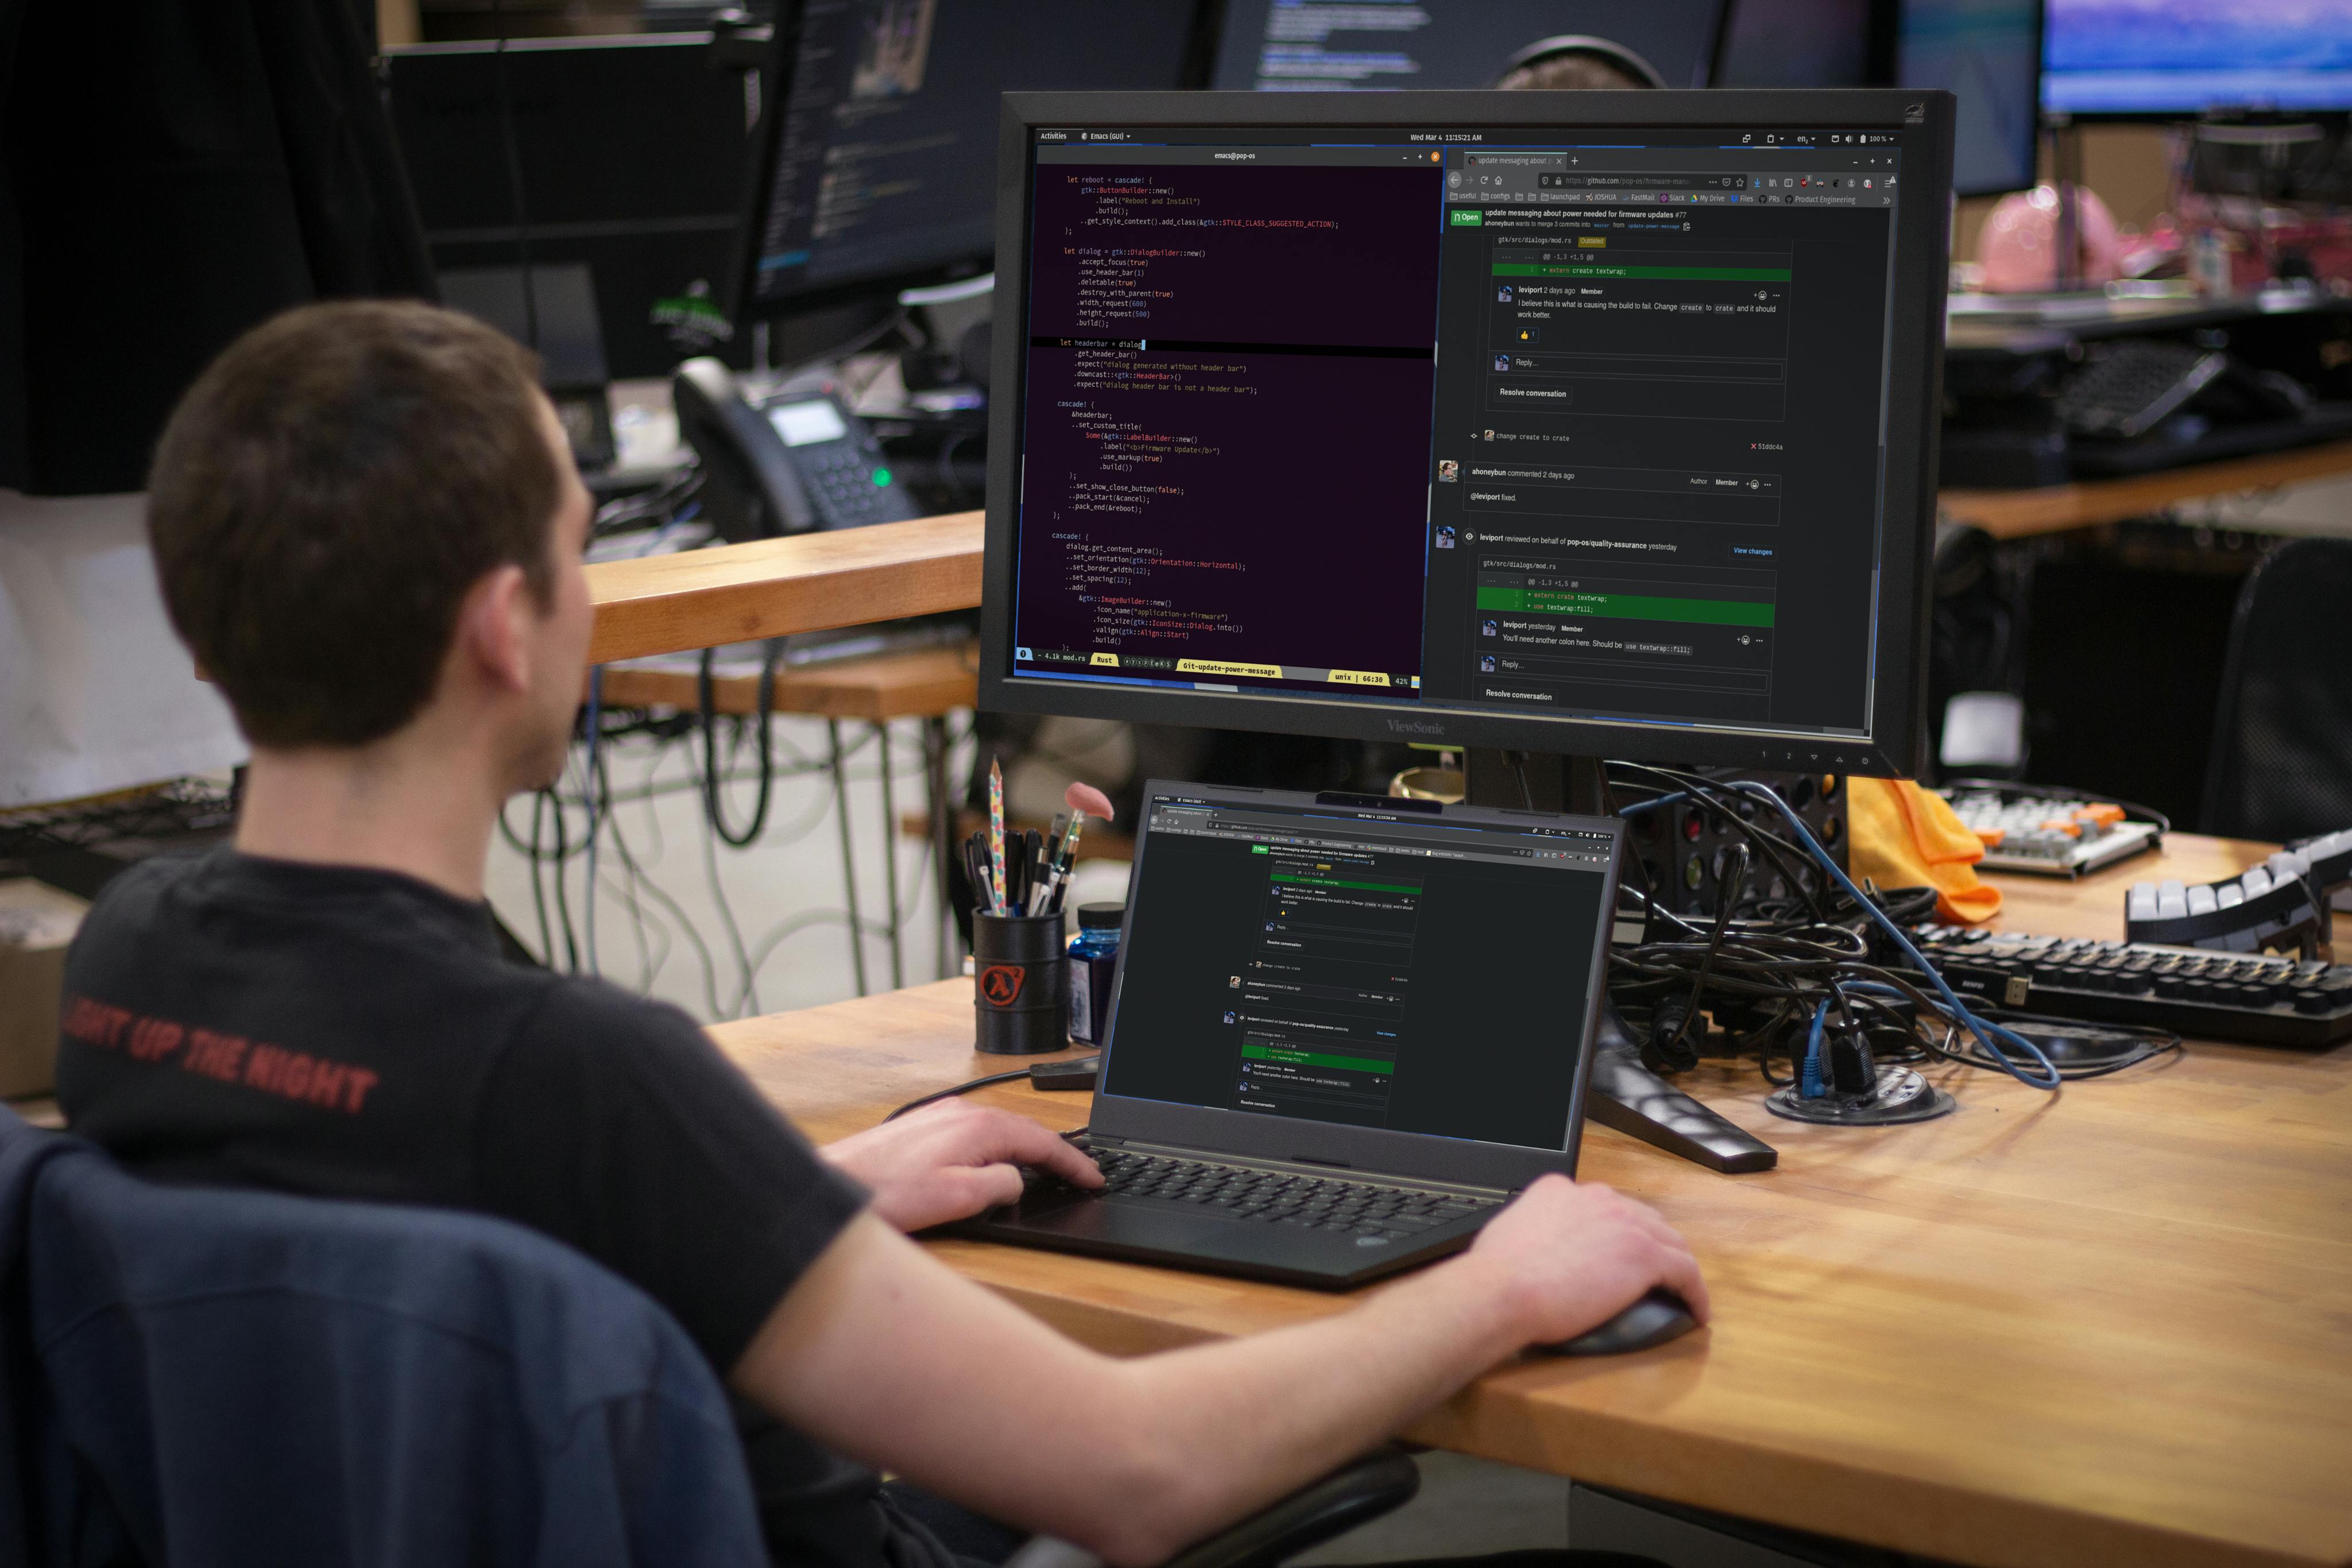 A person using both a Lemur Pro laptop and external monitor for coding.